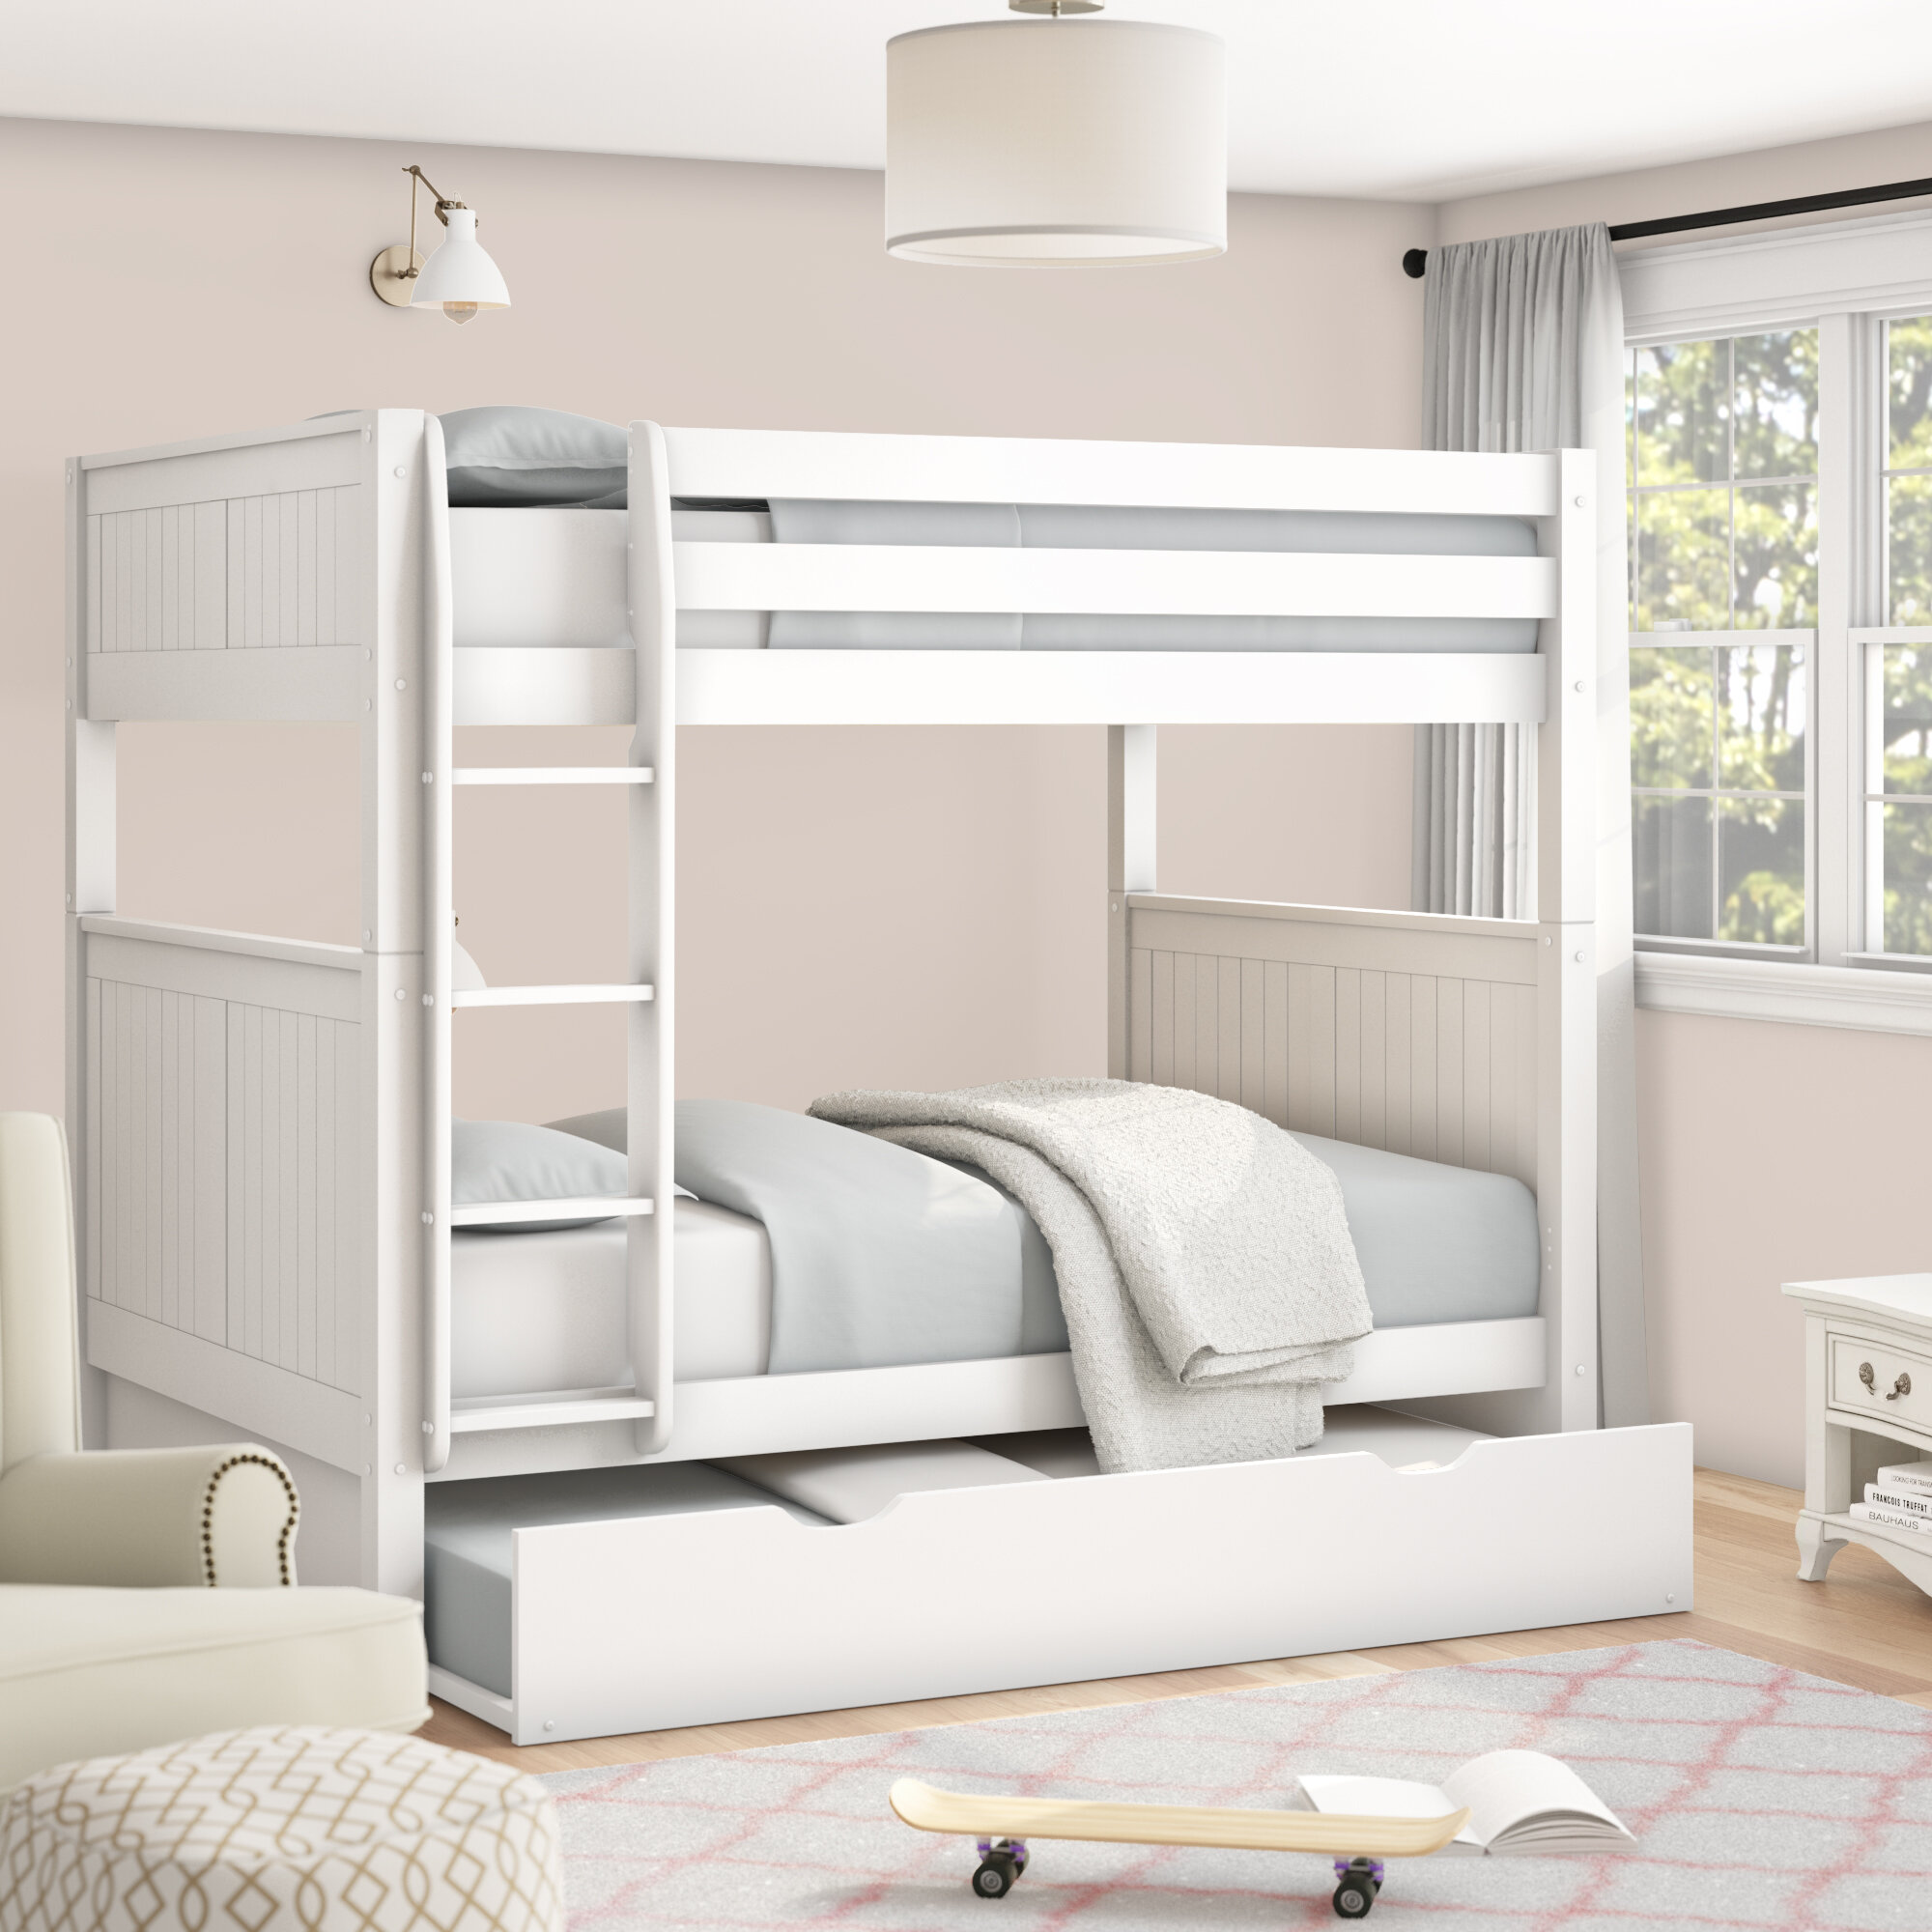 bunk beds with mattresses included